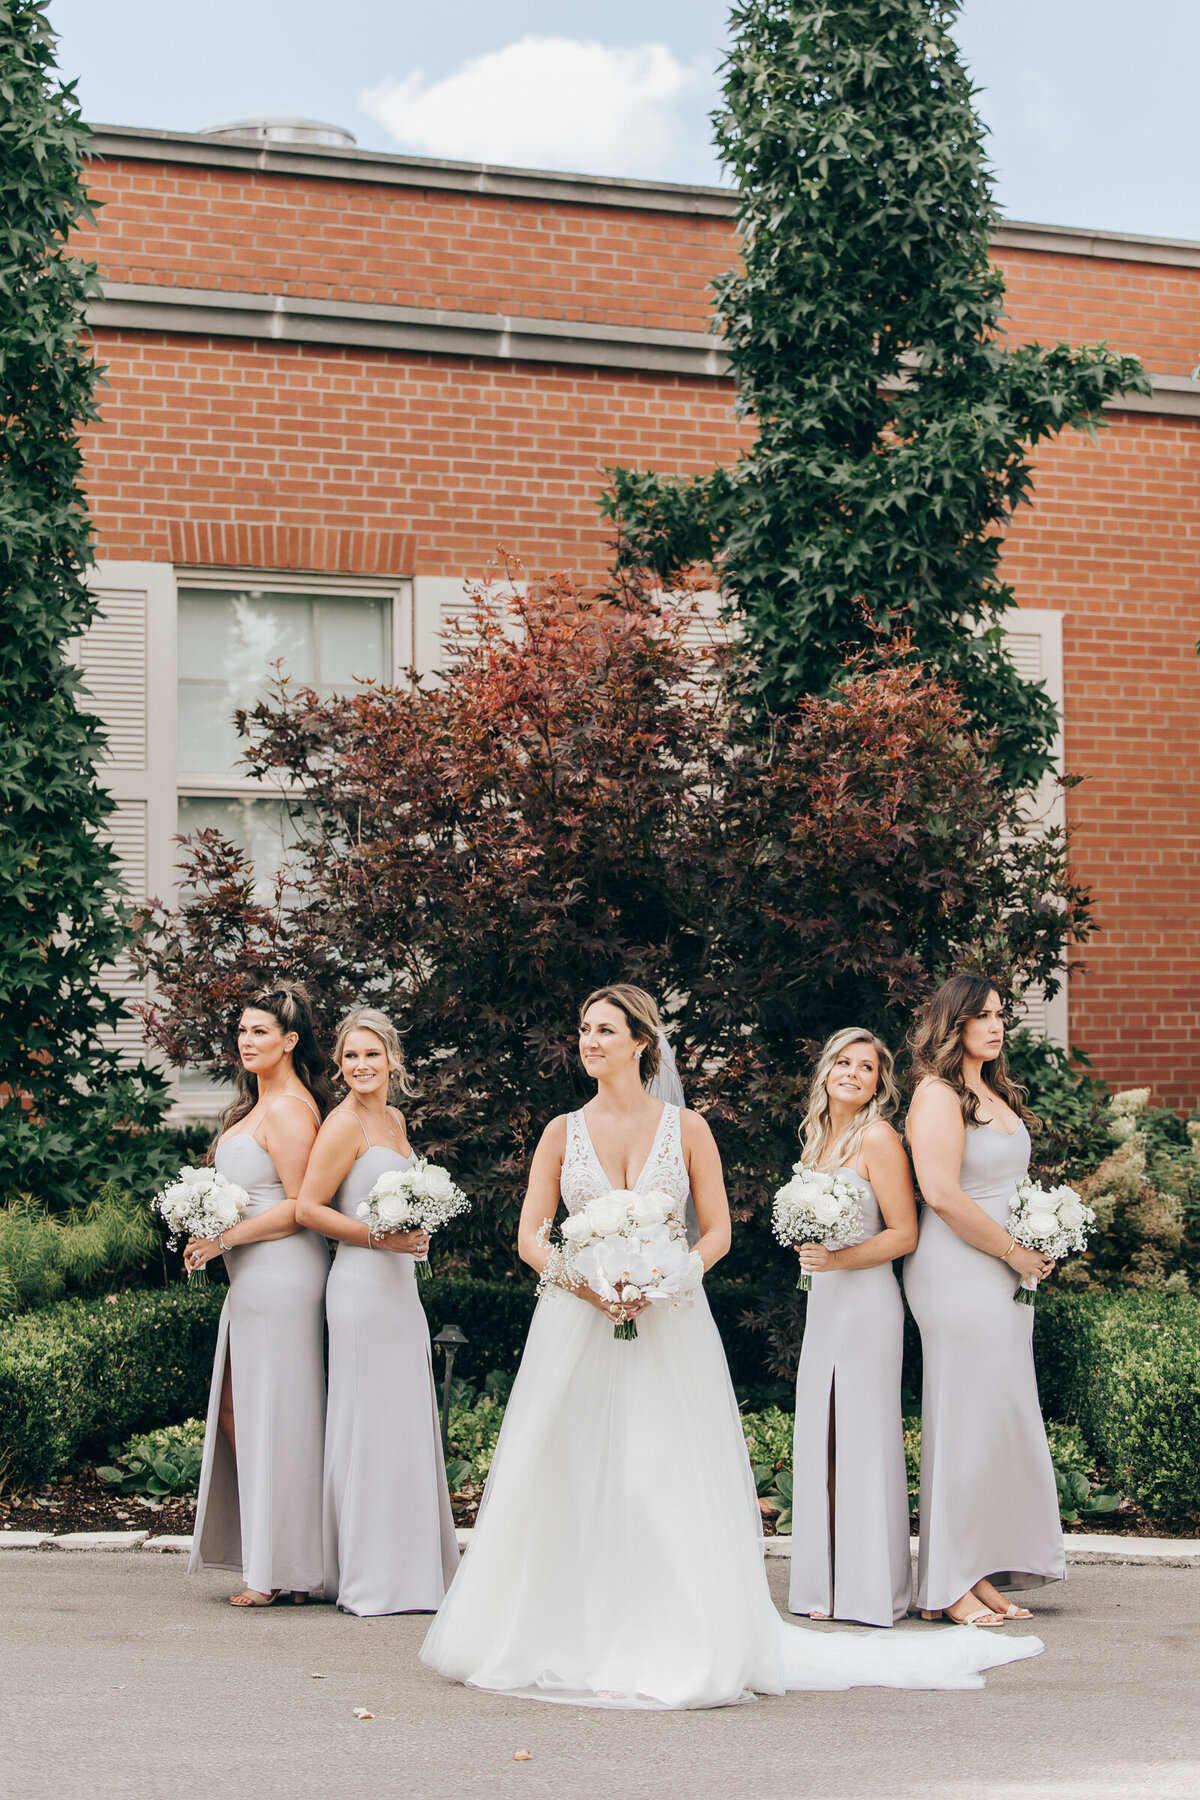 Bridesmaids holding white bouquets posing for traditional photos